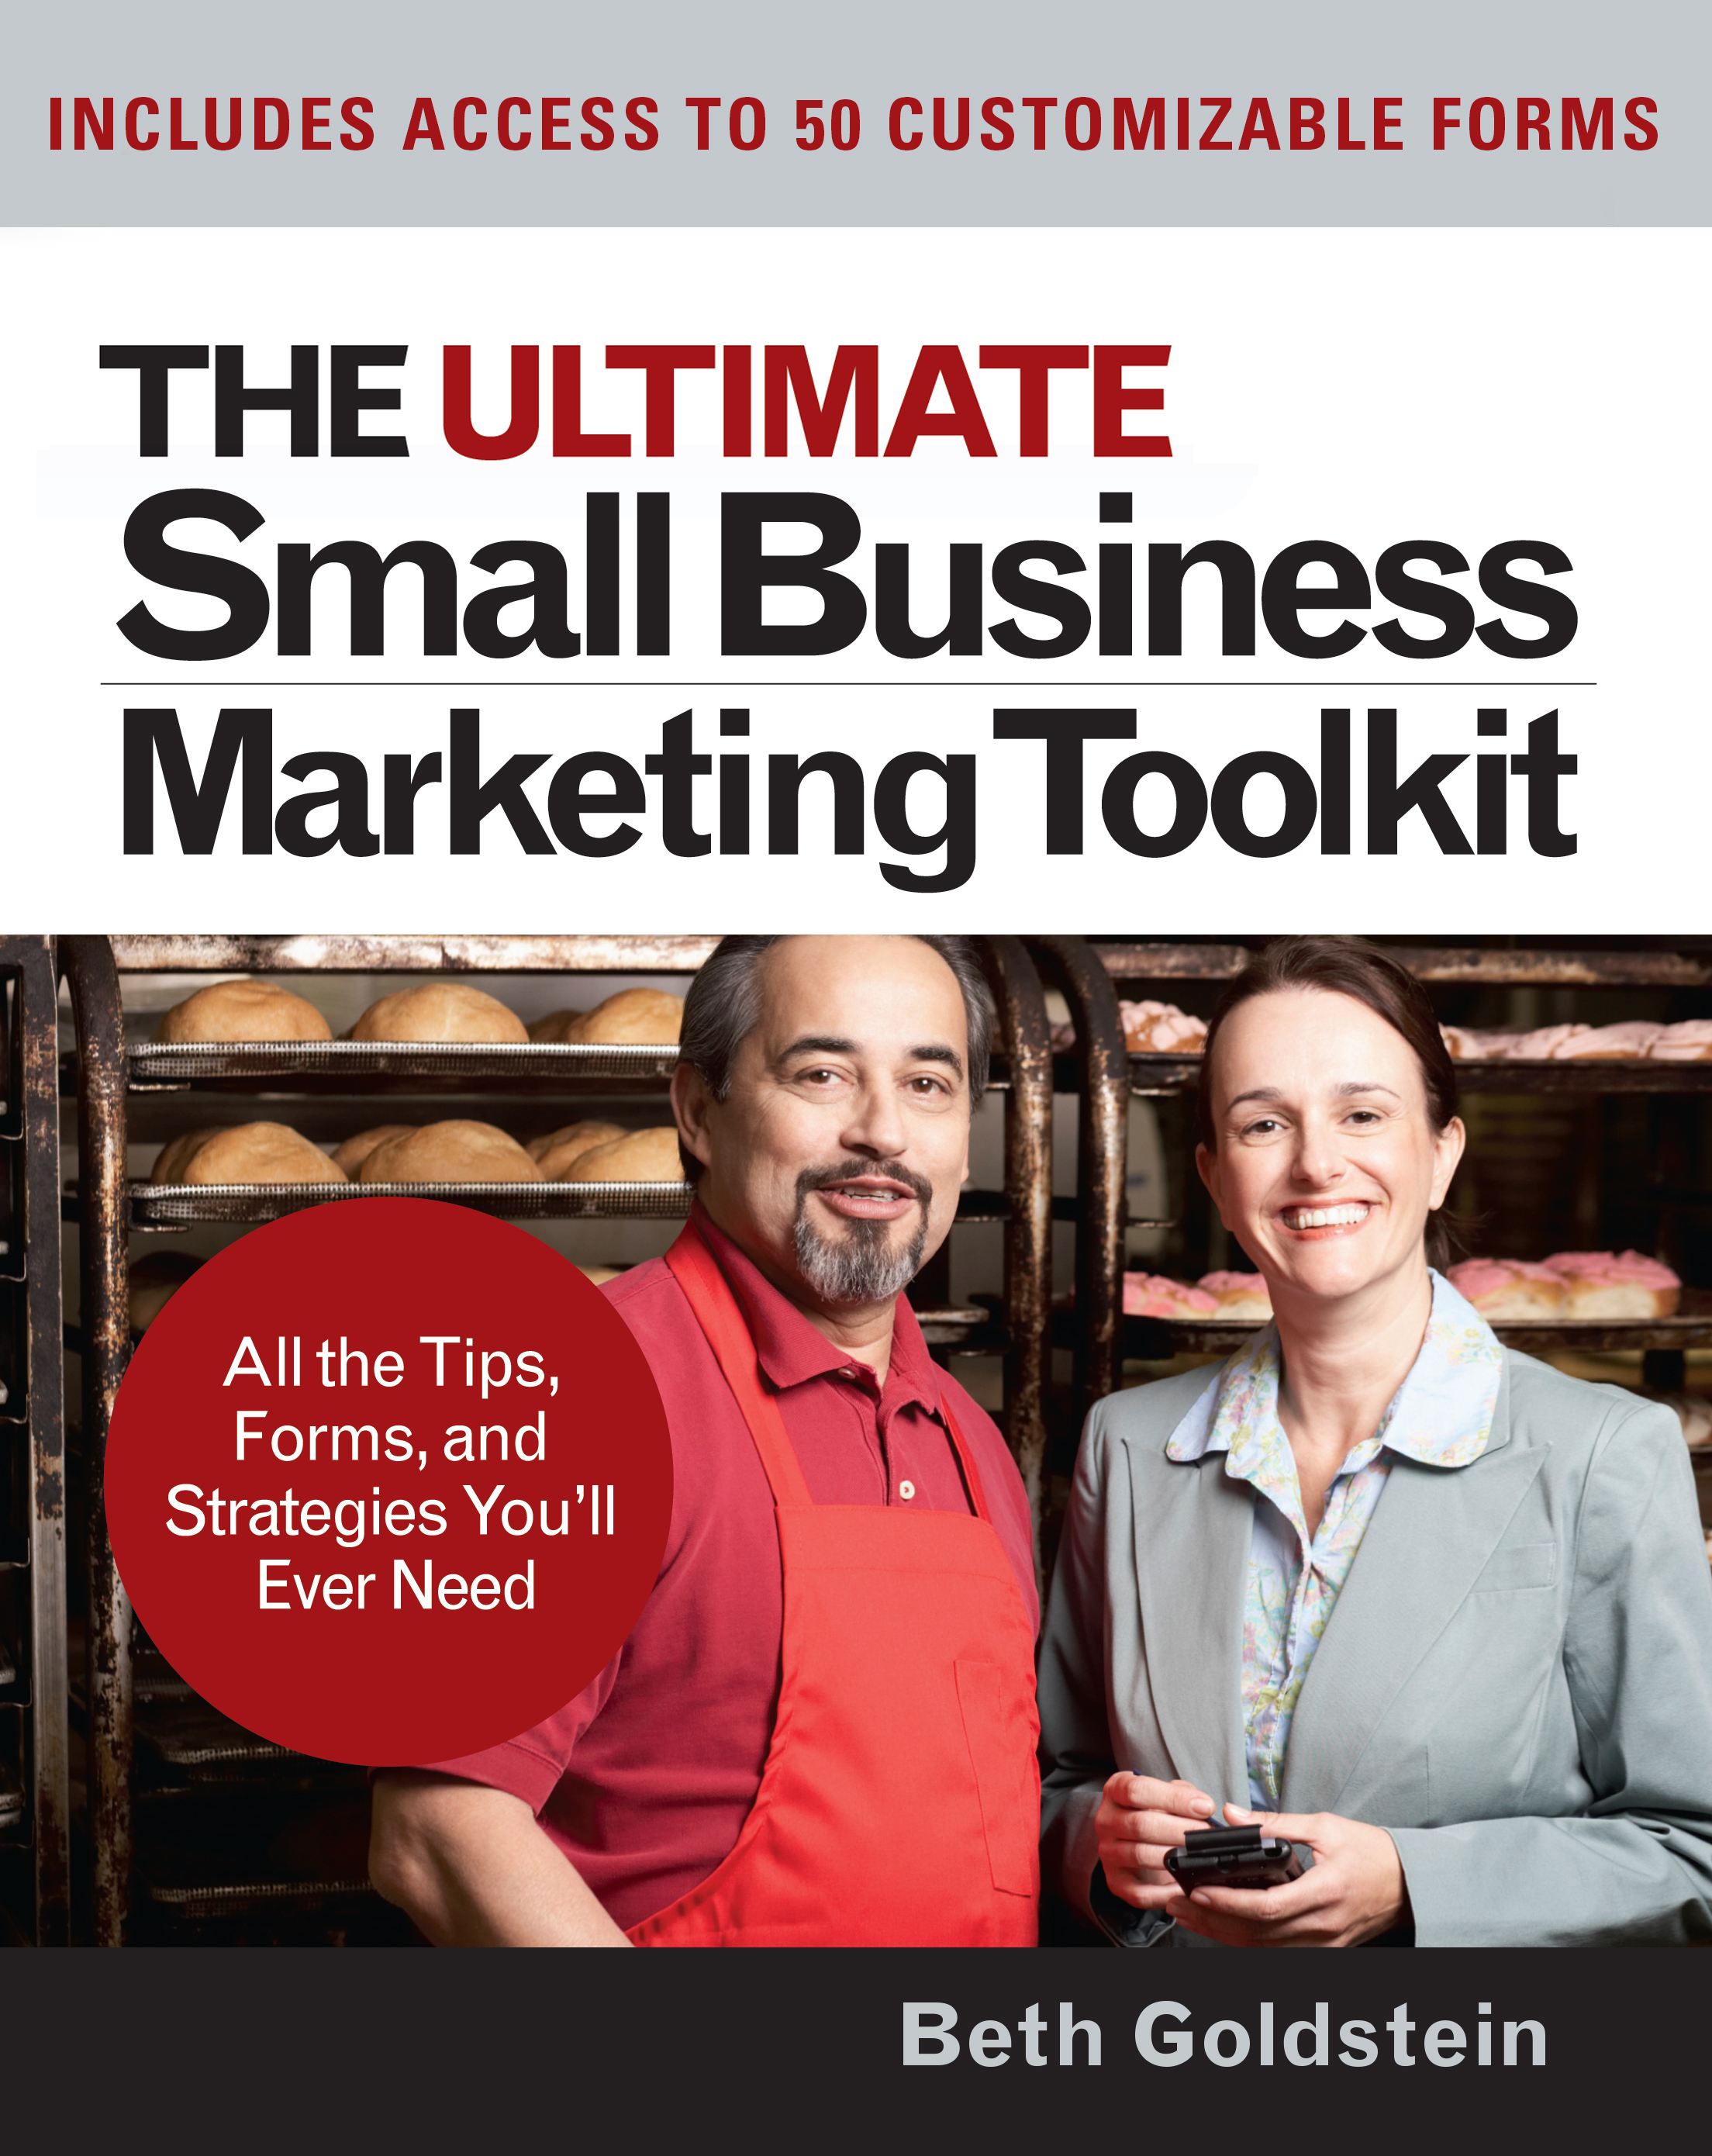 The Ultimate Small Business Marketing Toolkit - 15-24.99